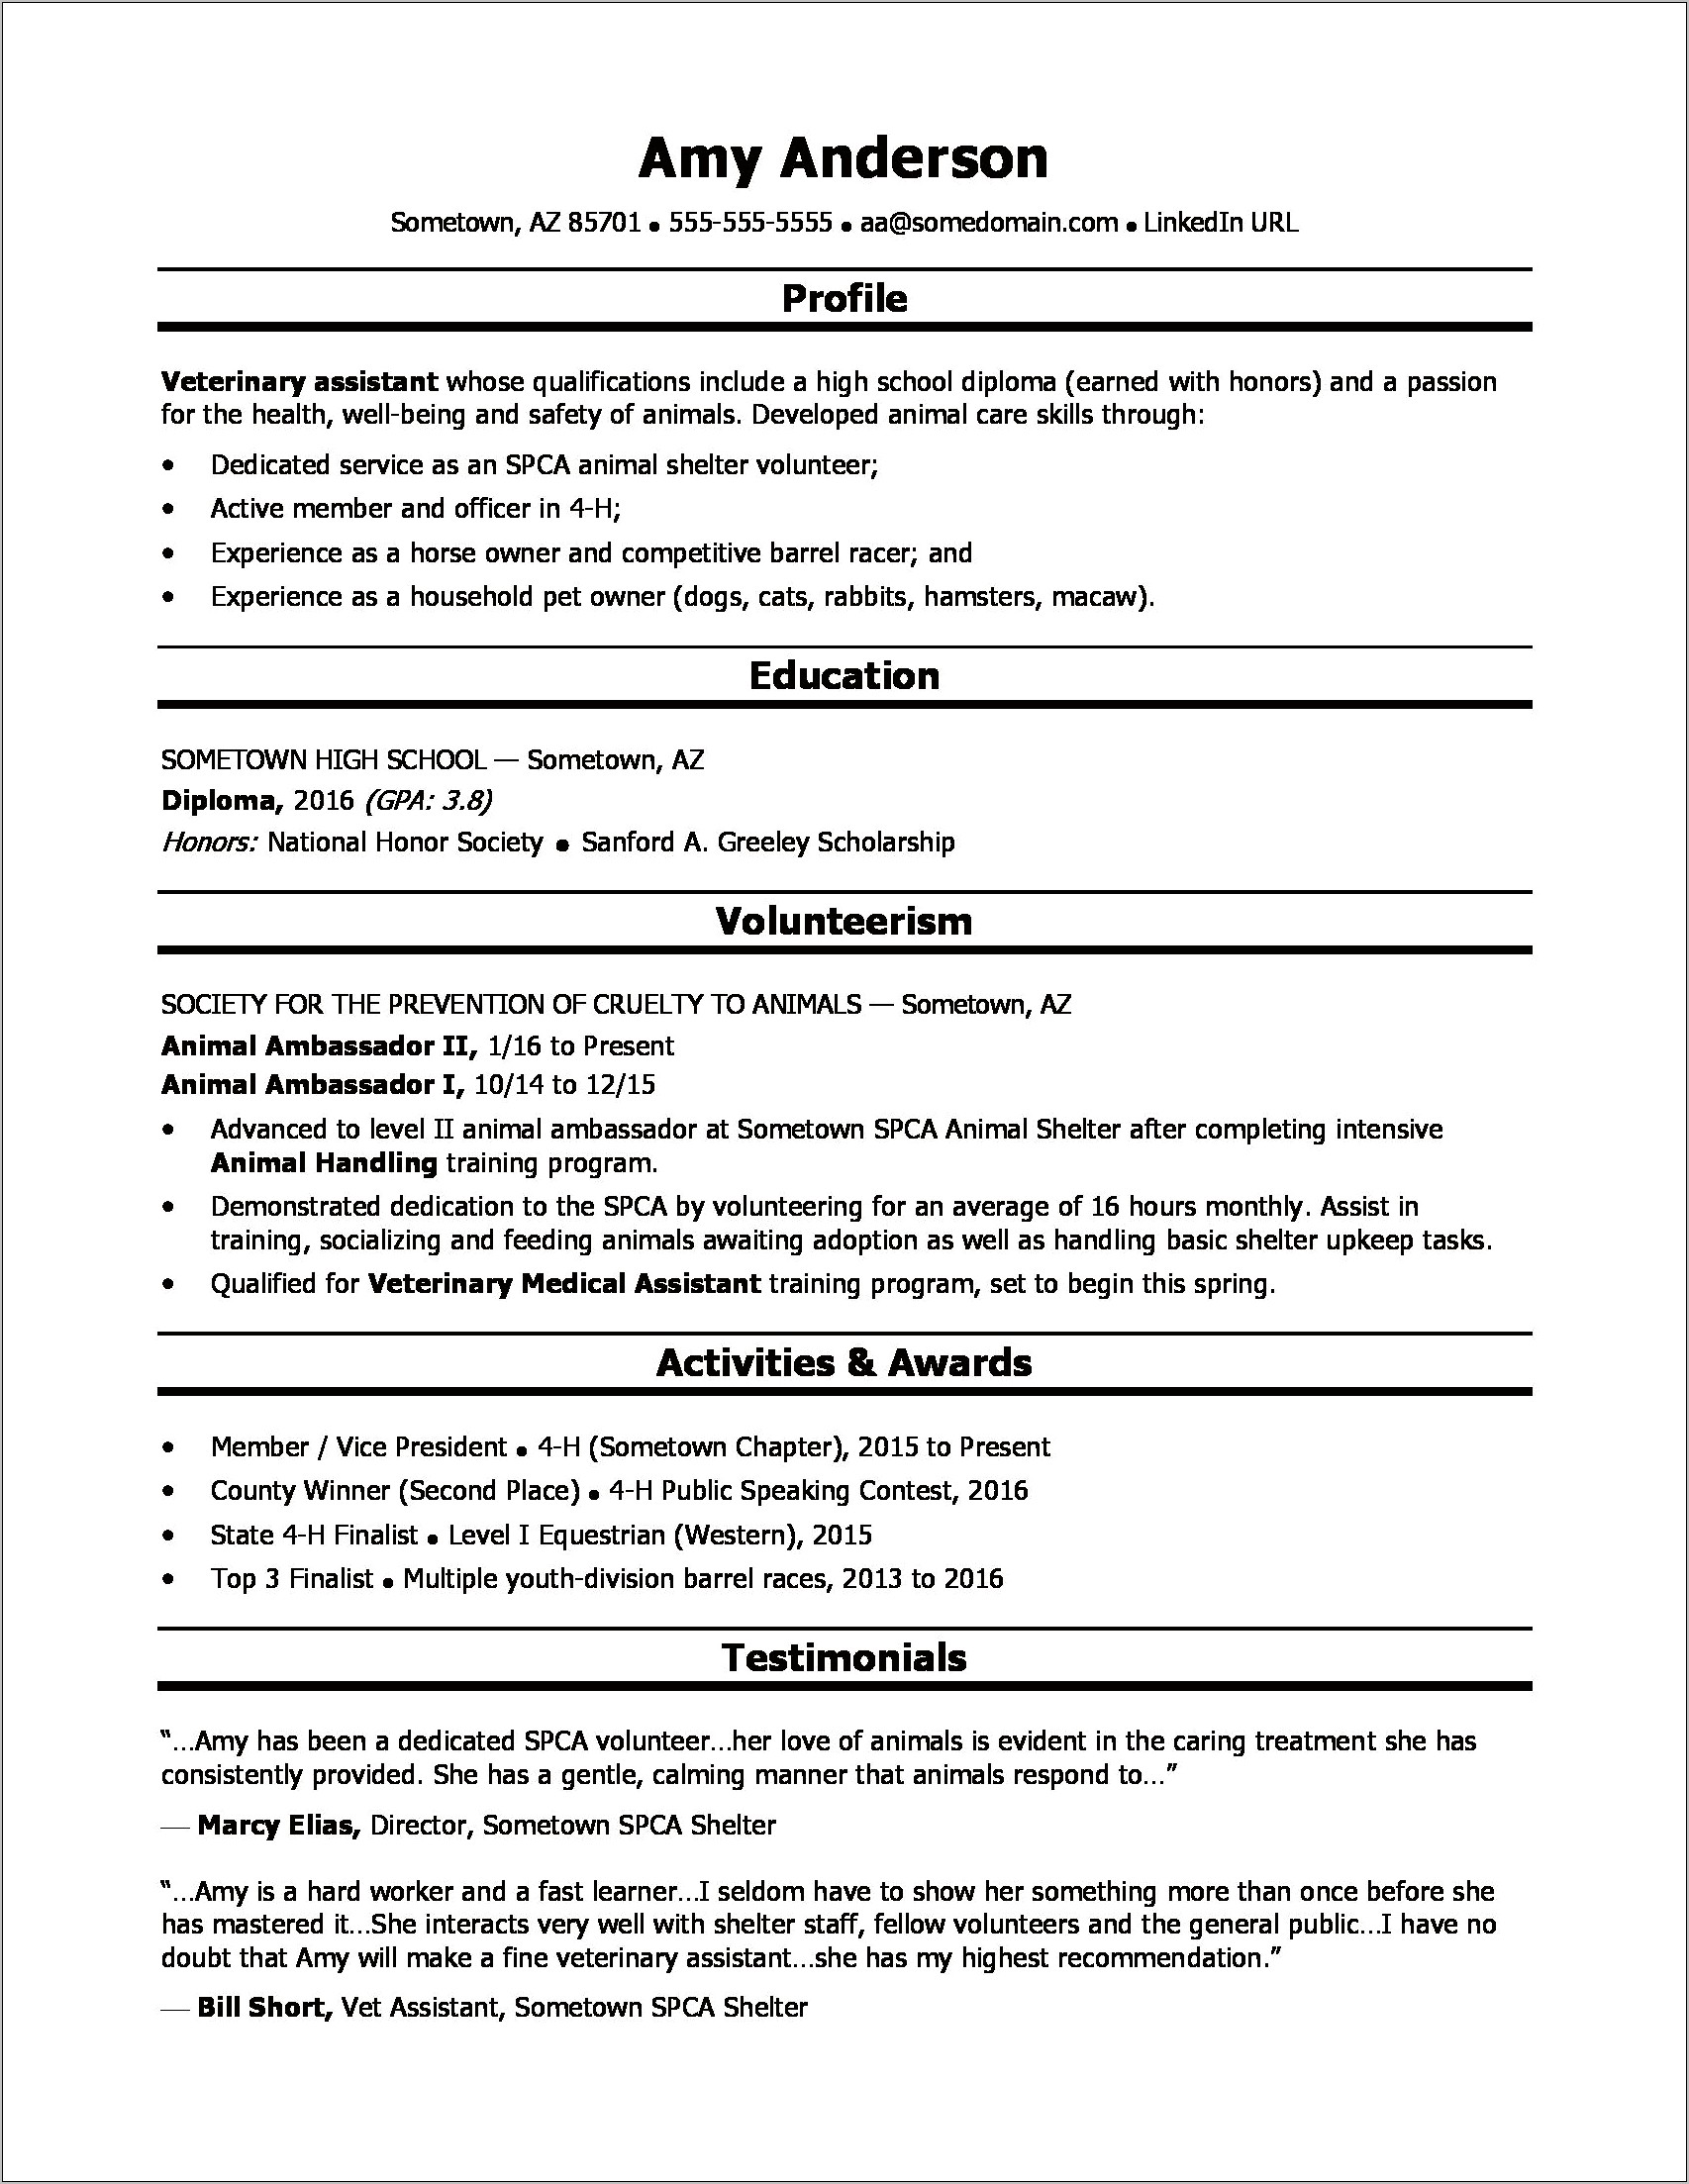 Sample Resume With Ongoing Education